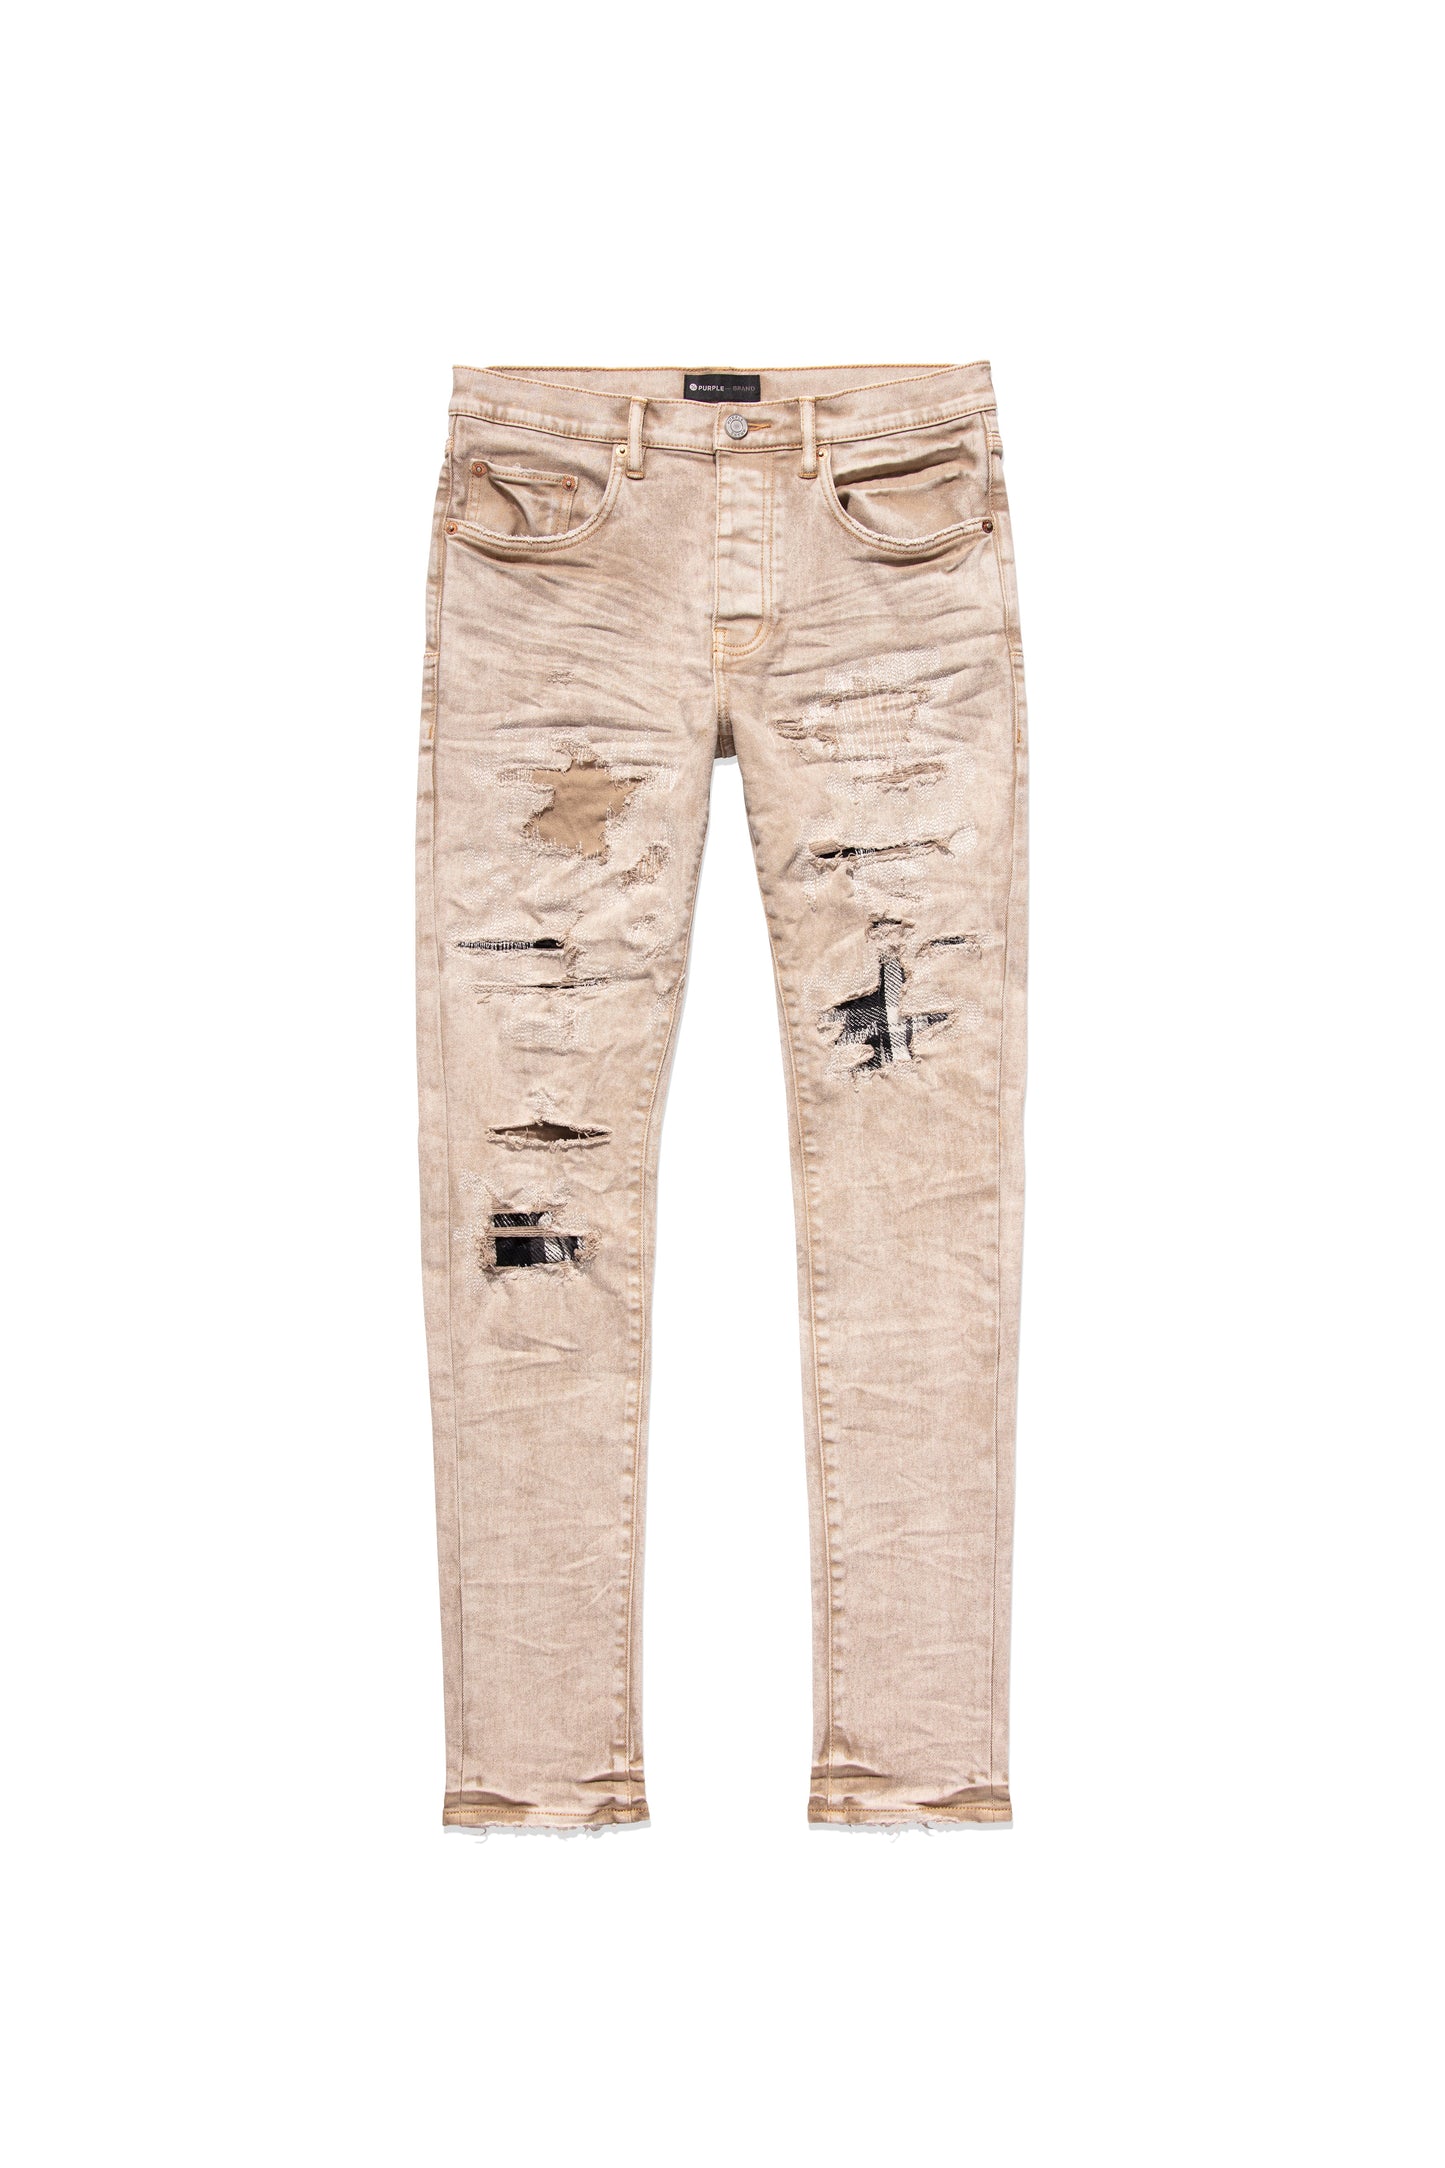 P001 LOW RISE SKINNY JEAN - Beige Heavy Repair With Plaid Patch